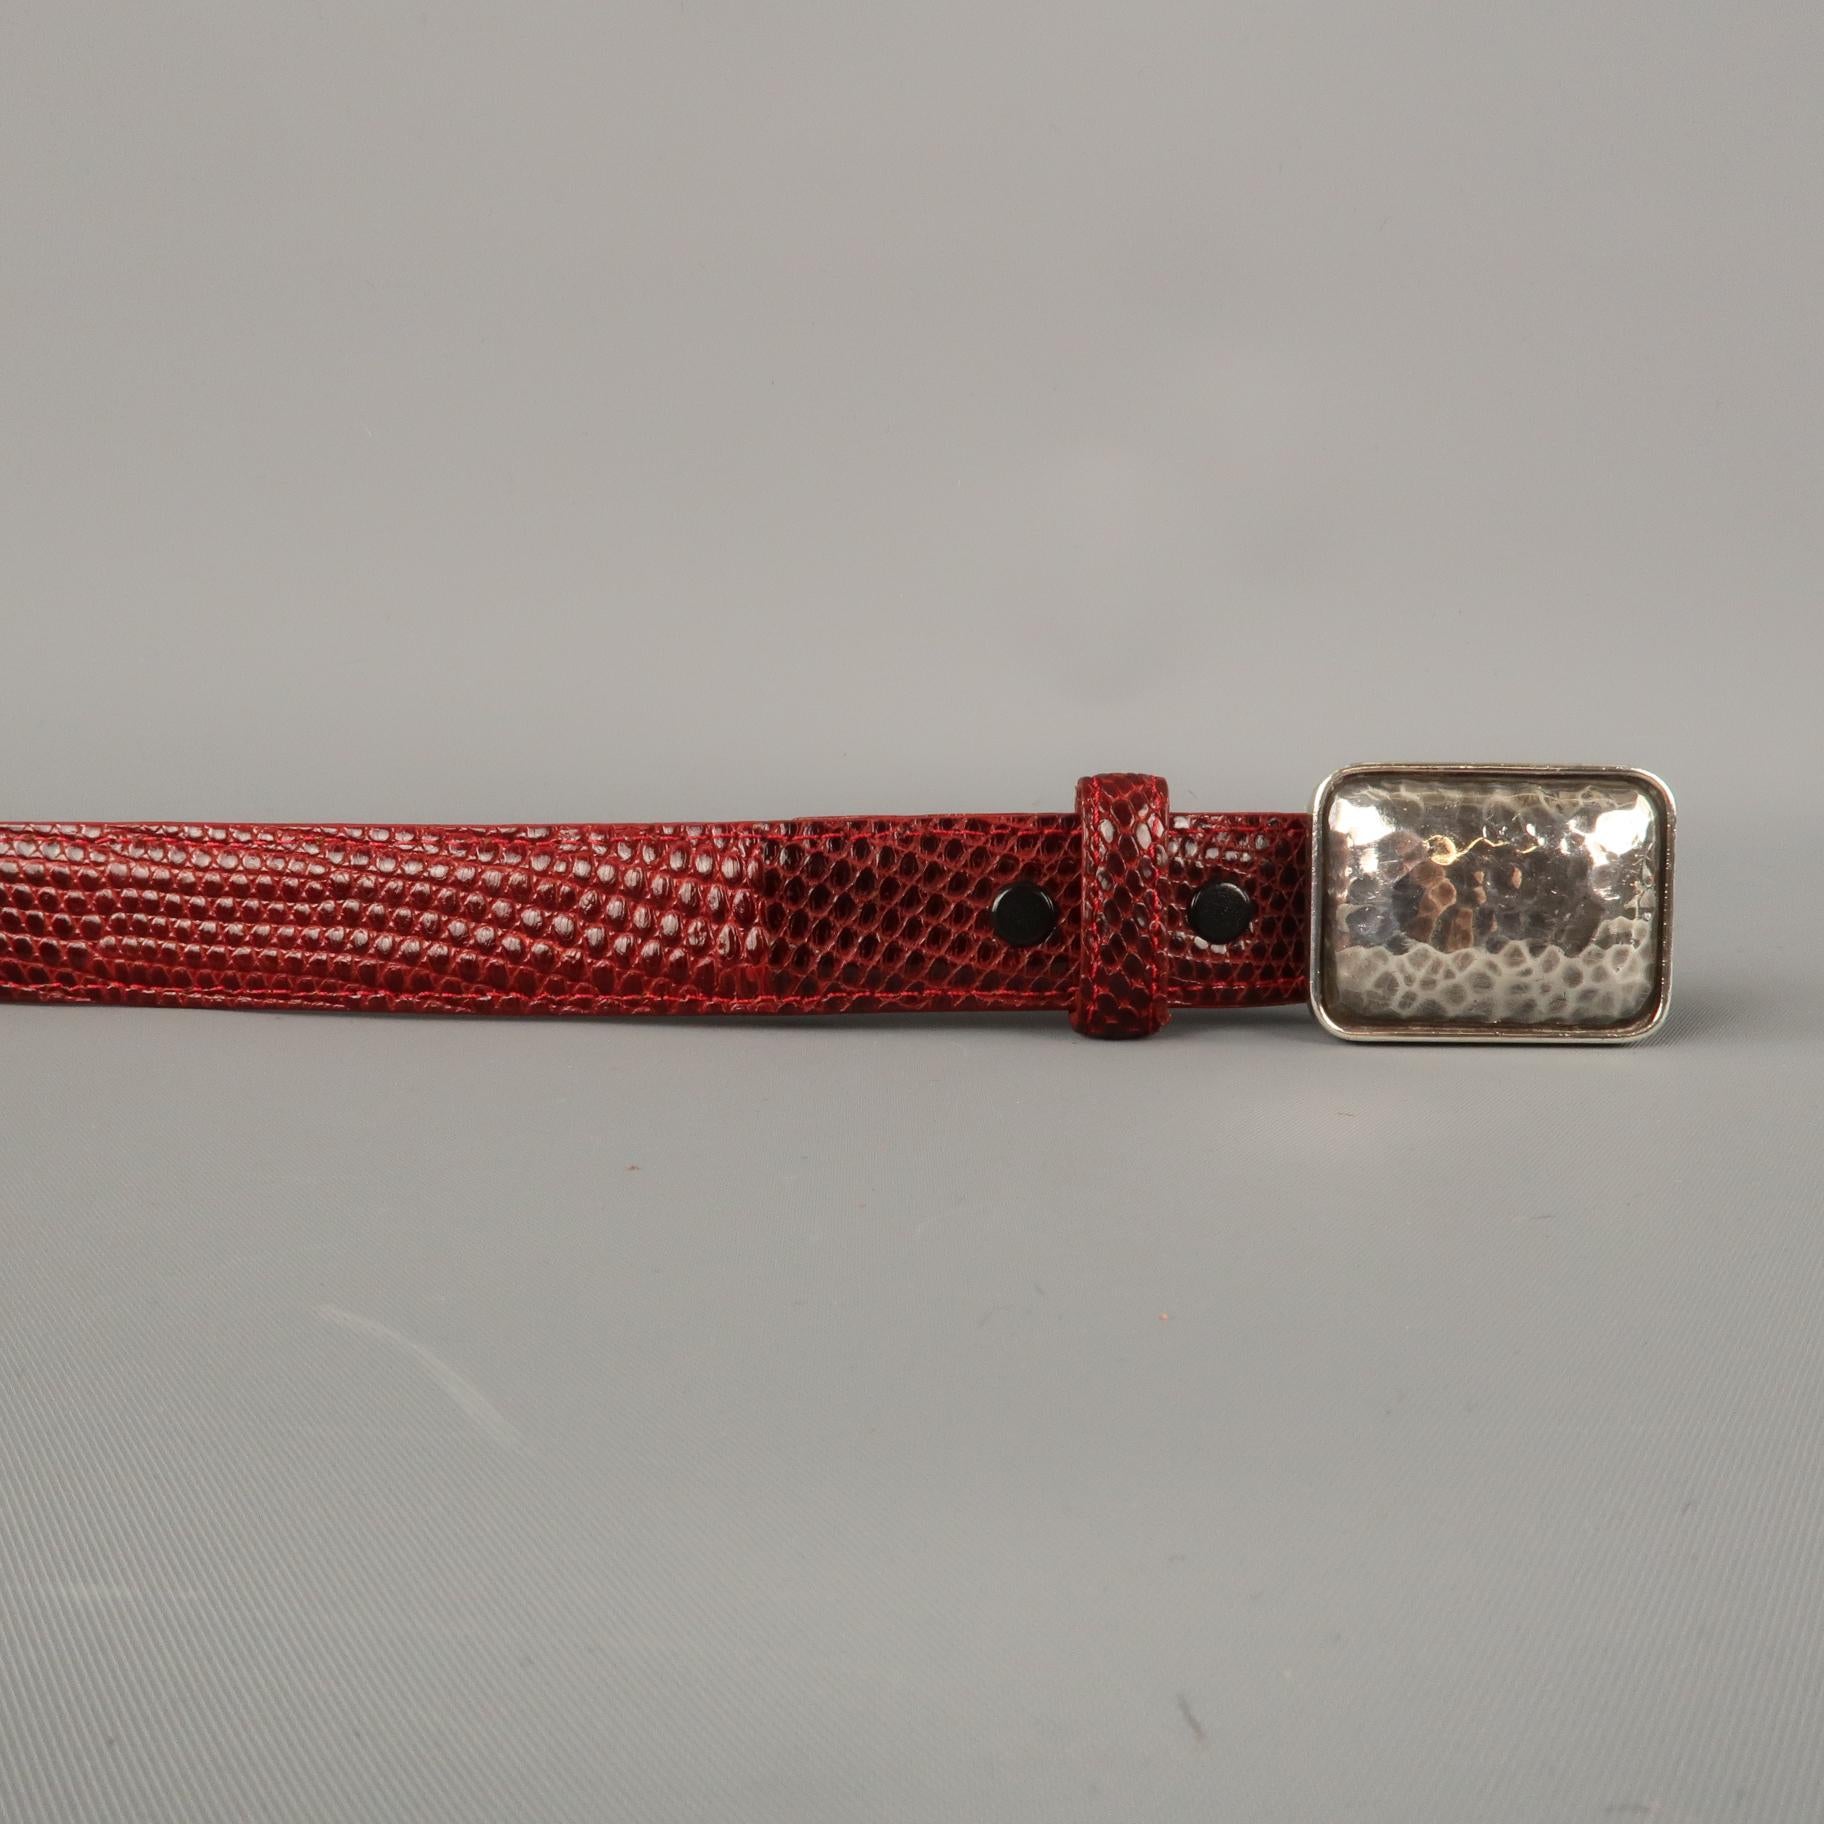 PAT AREIAS belt comes in a red lizard textured leather featuring a sterling silver buckle. Wear inside. Made in USA.  

Excellent Pre-Owned Condition.
Marked: 32

Length: 39.5 in.
Width: 1.5 in.
Fits: 31.5 - 34.5 in.